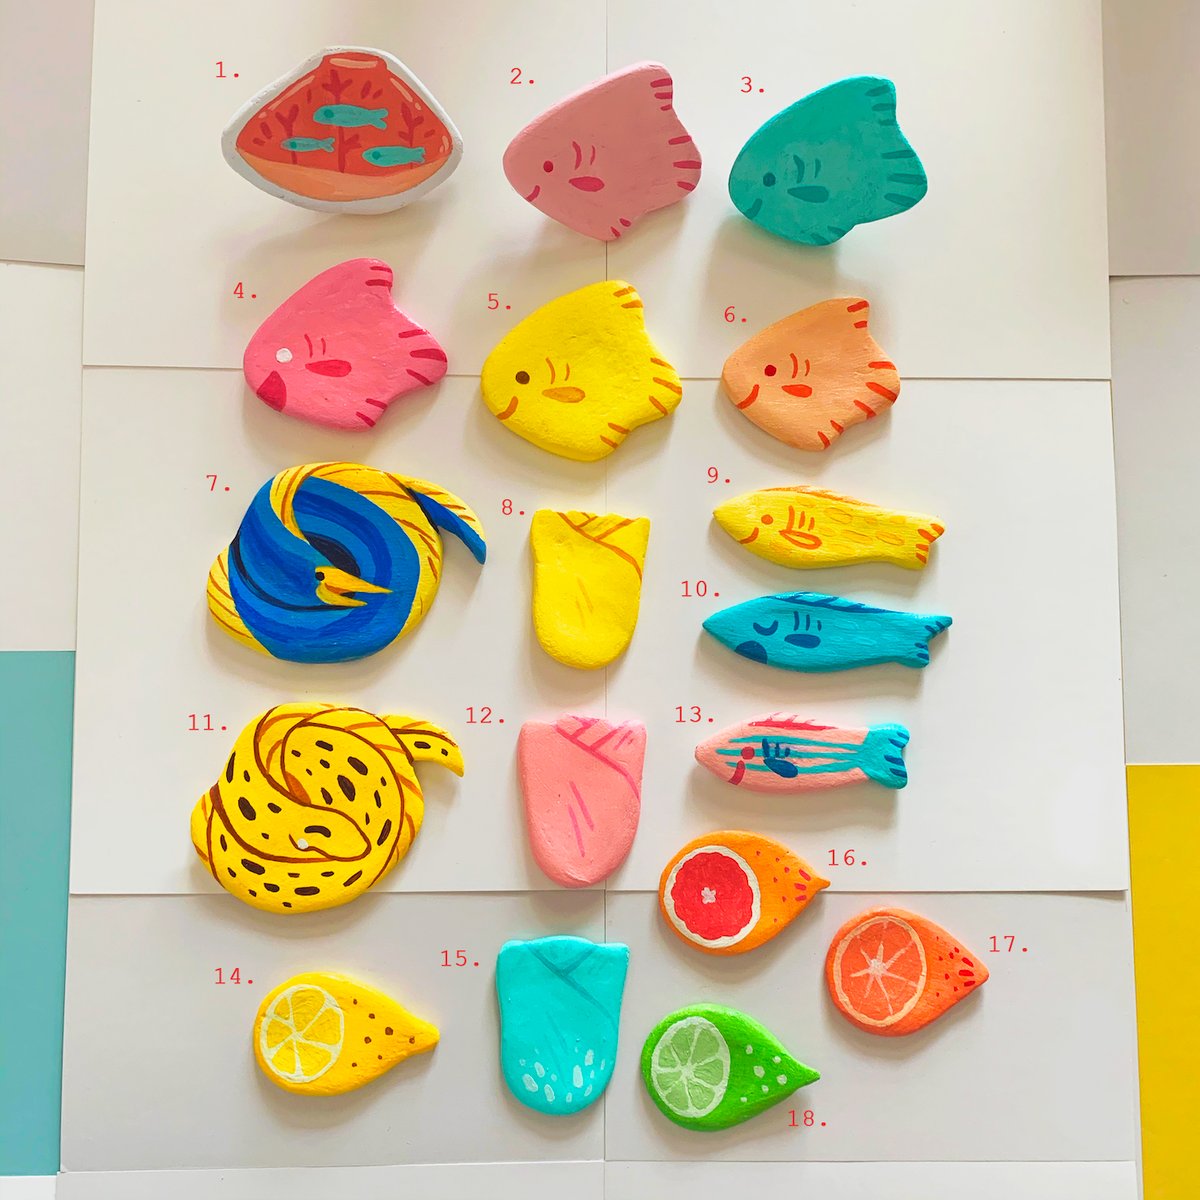 ILLUSTRATING PINS MADE OF CLAY using gouache 